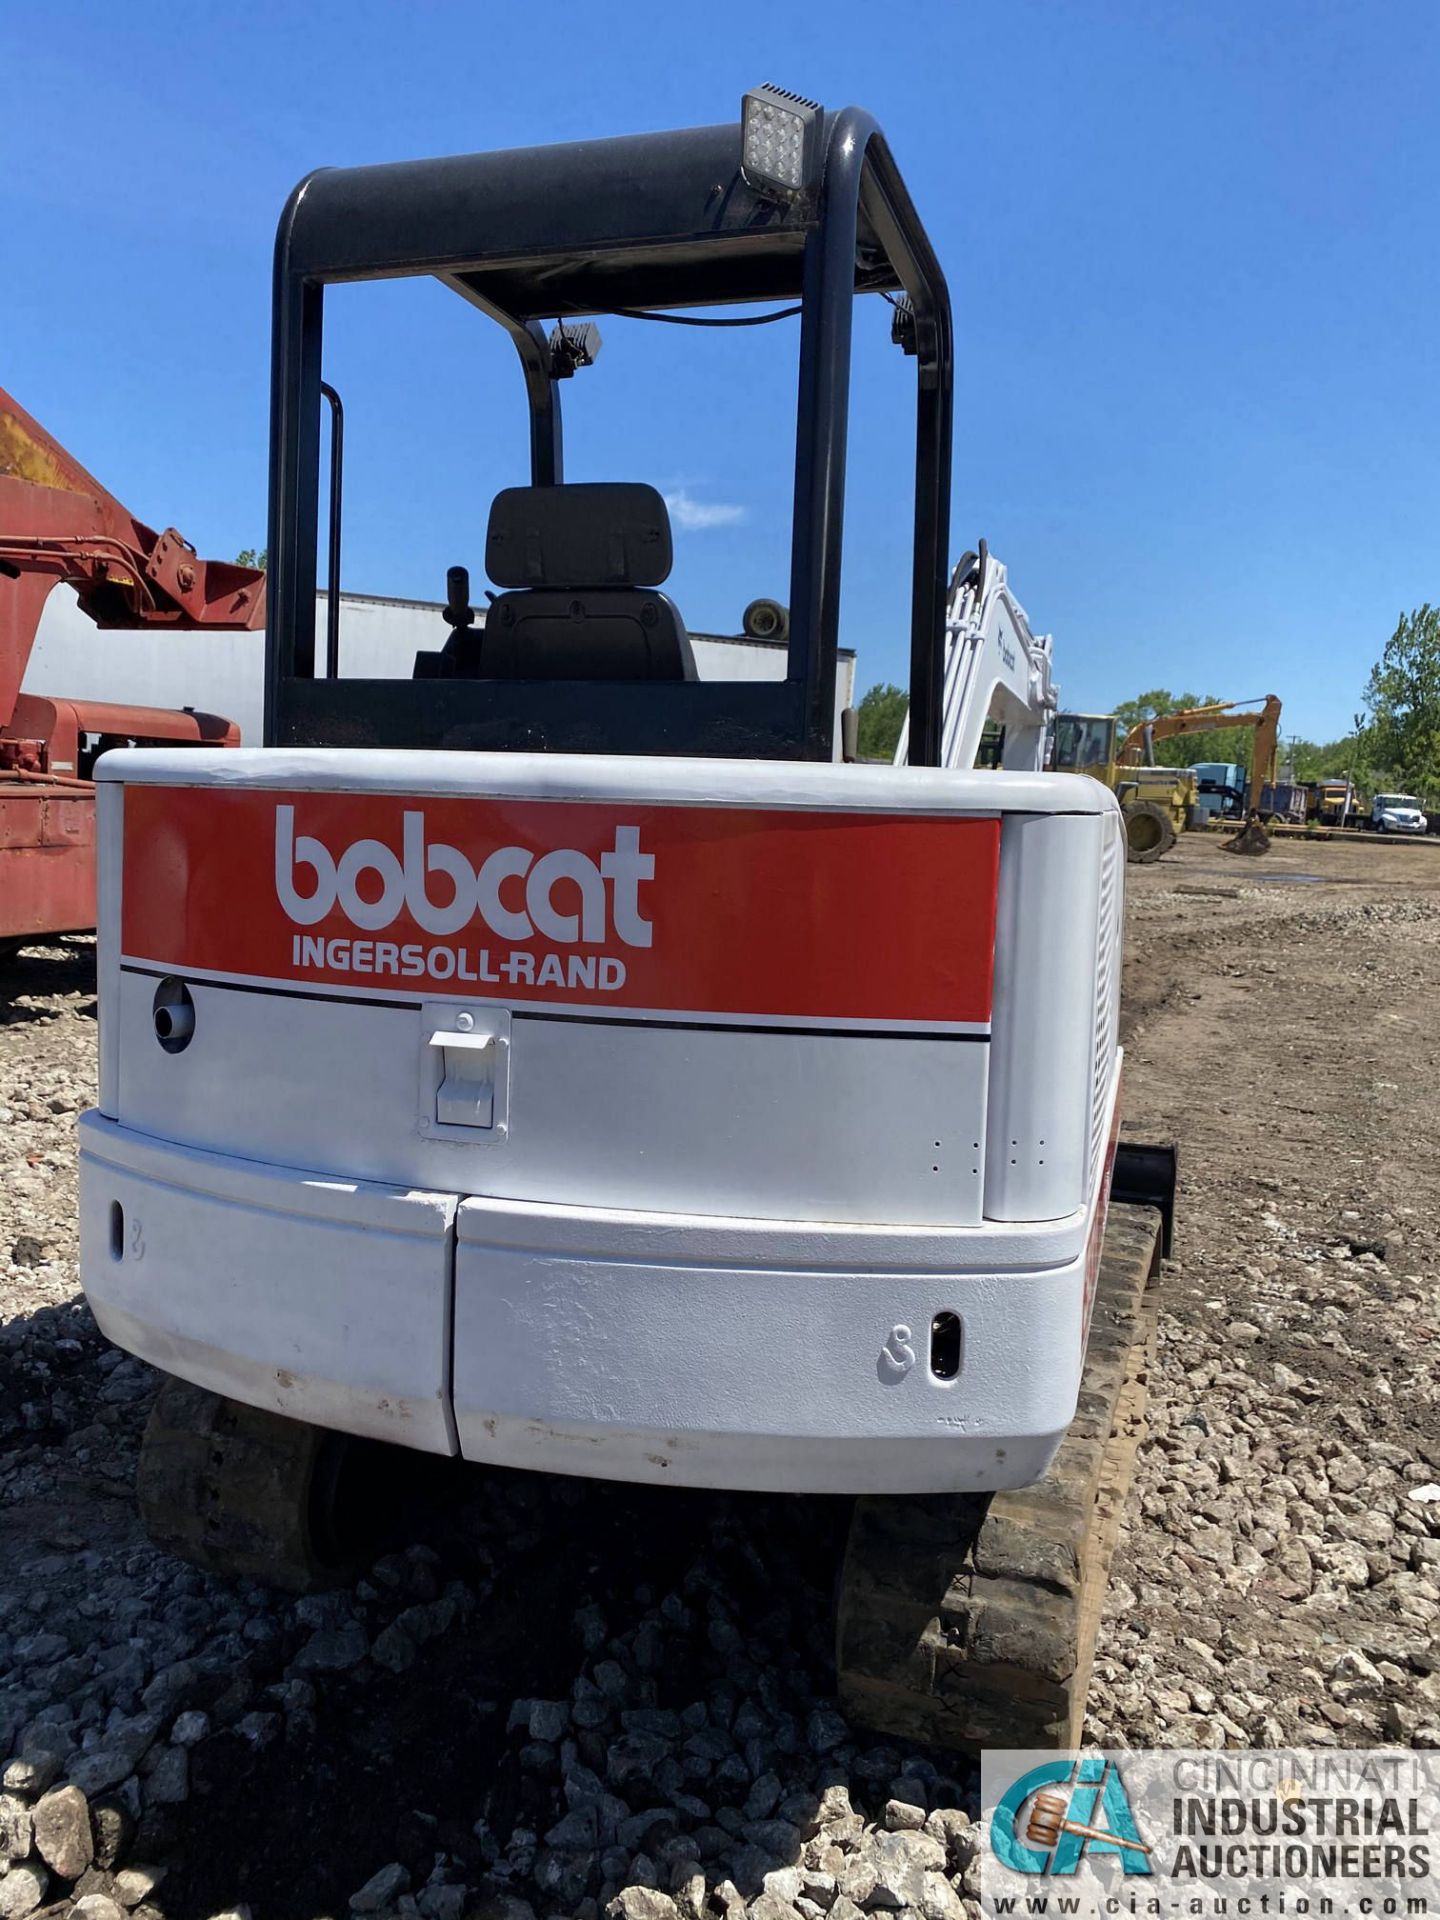 BOBCAT 331 MINI EXCAVATOR, 4-CYLINDER DIESEL ENGINE, 6,275 HOURS; S/N 511920385, WITH 20" TOOTH - Image 7 of 7